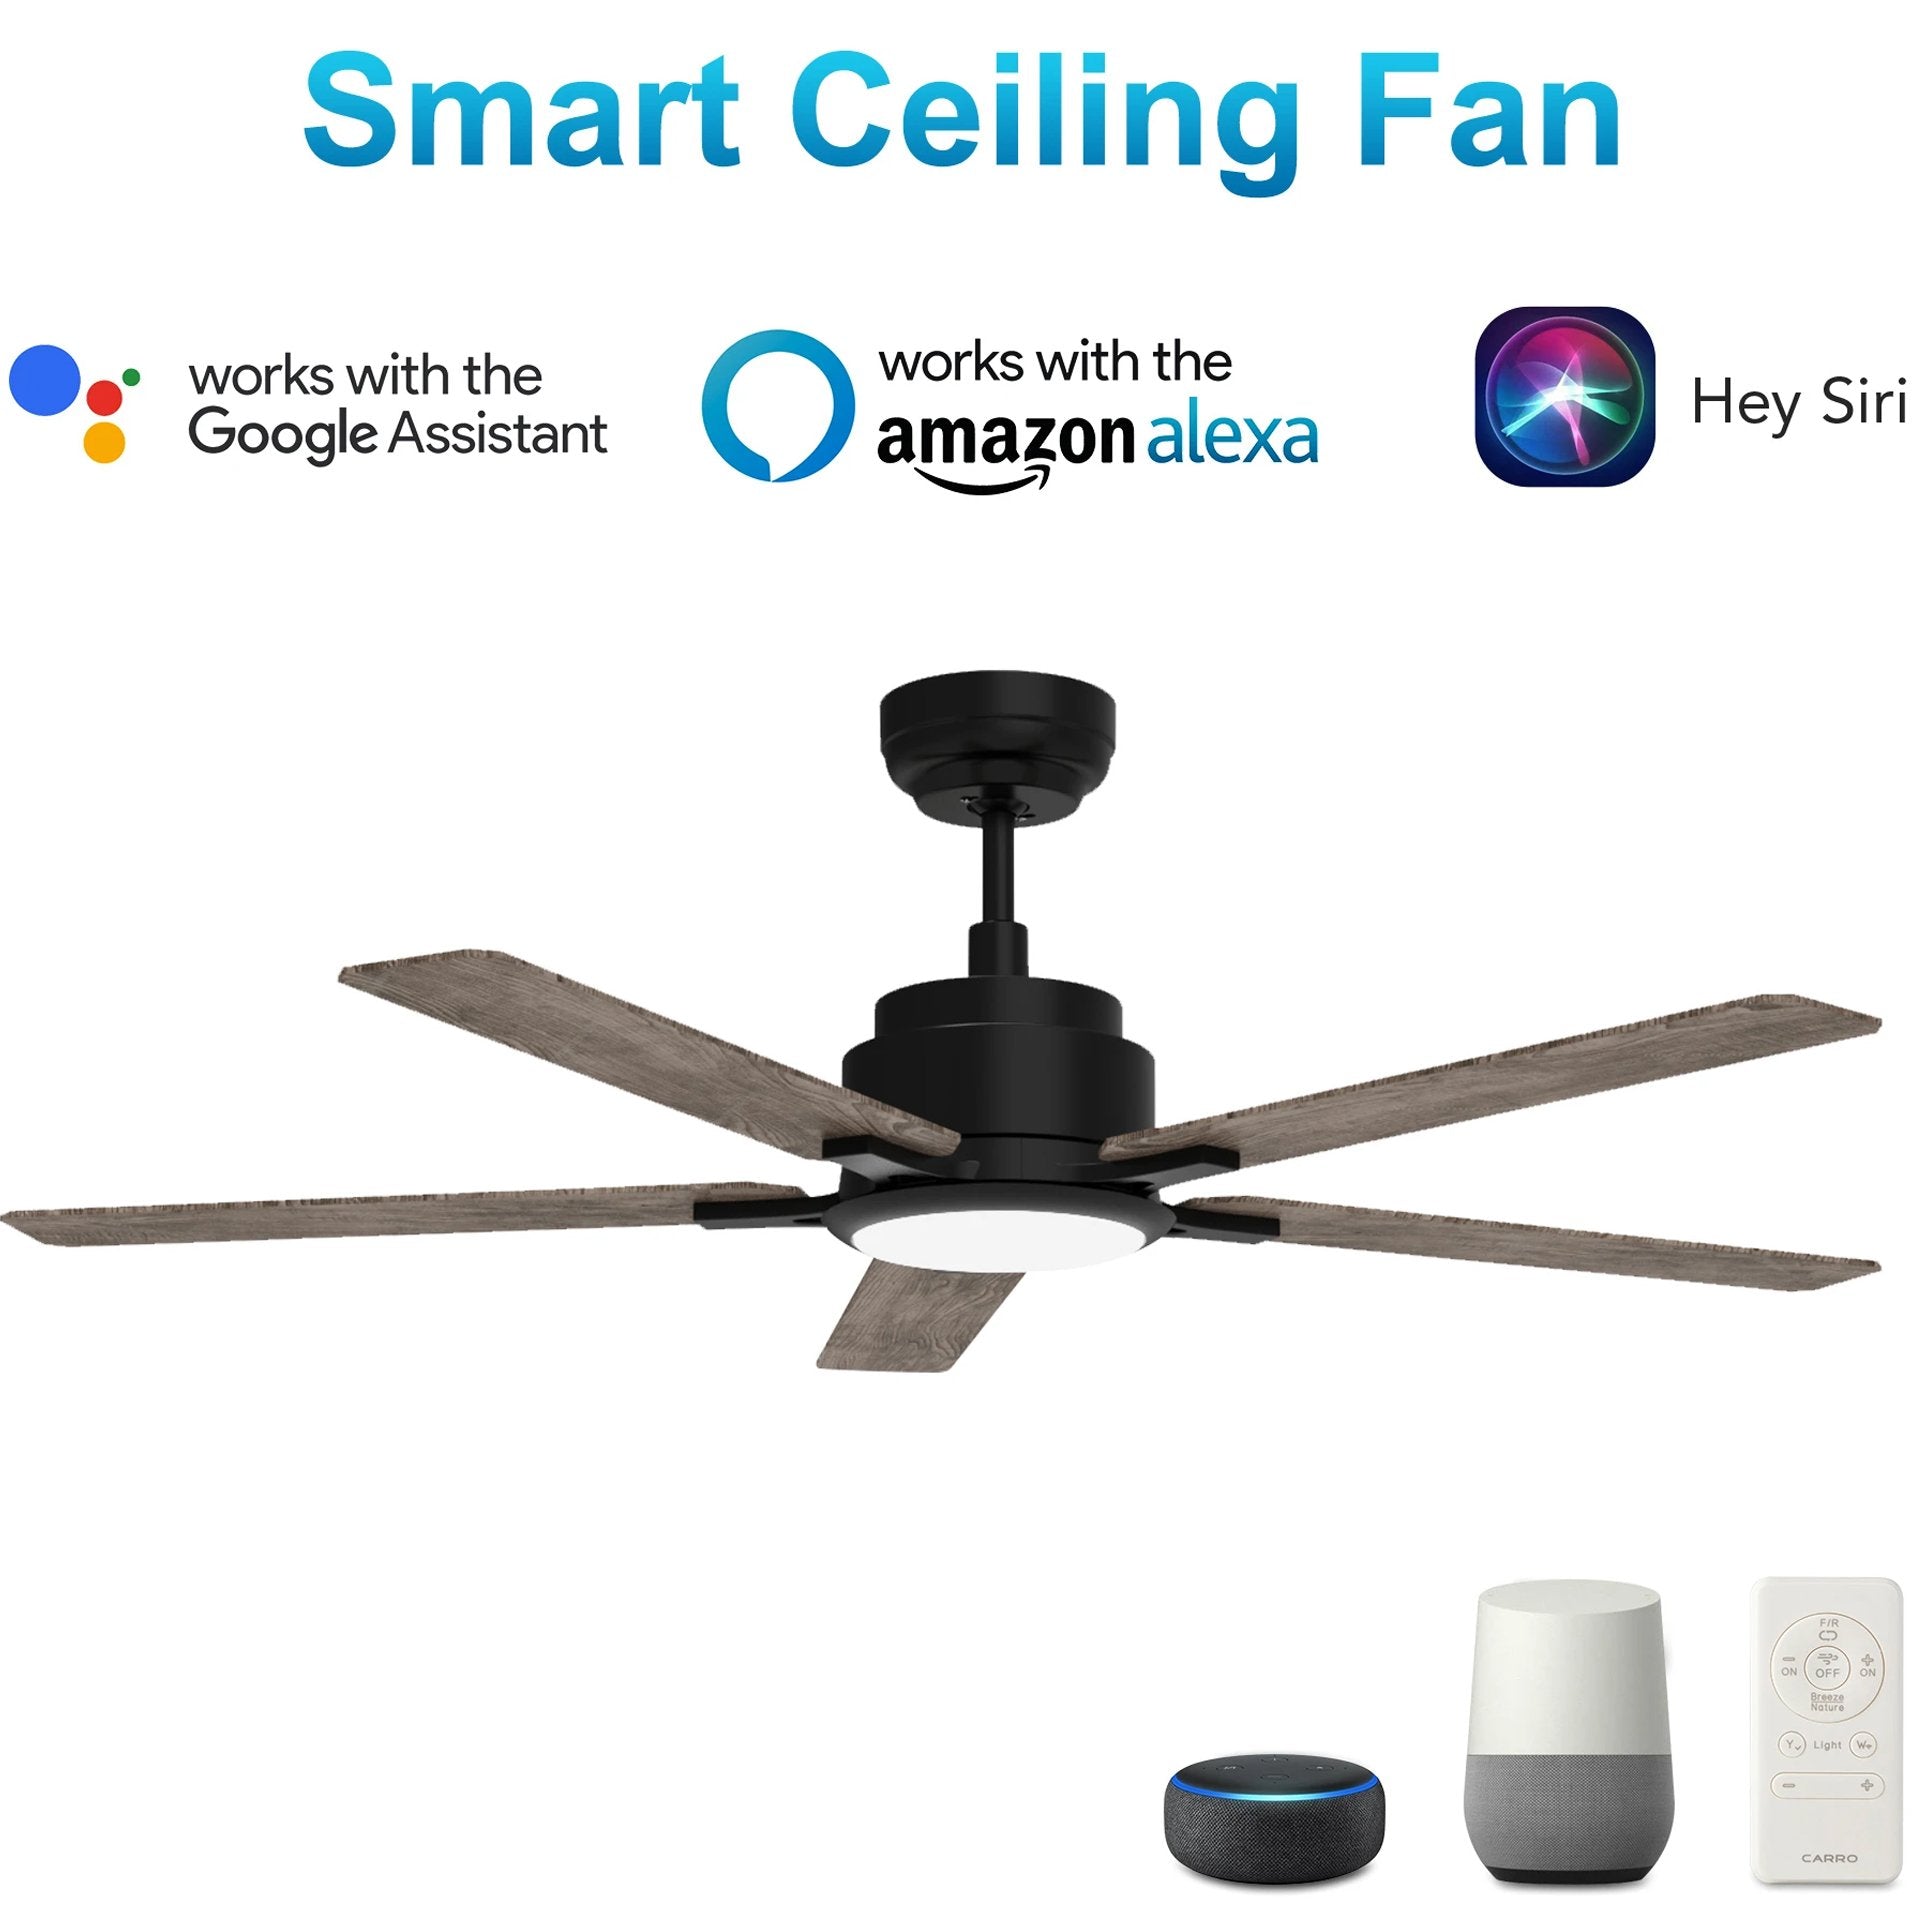 Essex 52" In. Black/ 5 Blade Smart Ceiling Fan with Dimmable LED Light Kit Works with Remote Control, Wi-Fi apps and Voice control via Google Assistant/Alexa/Siri